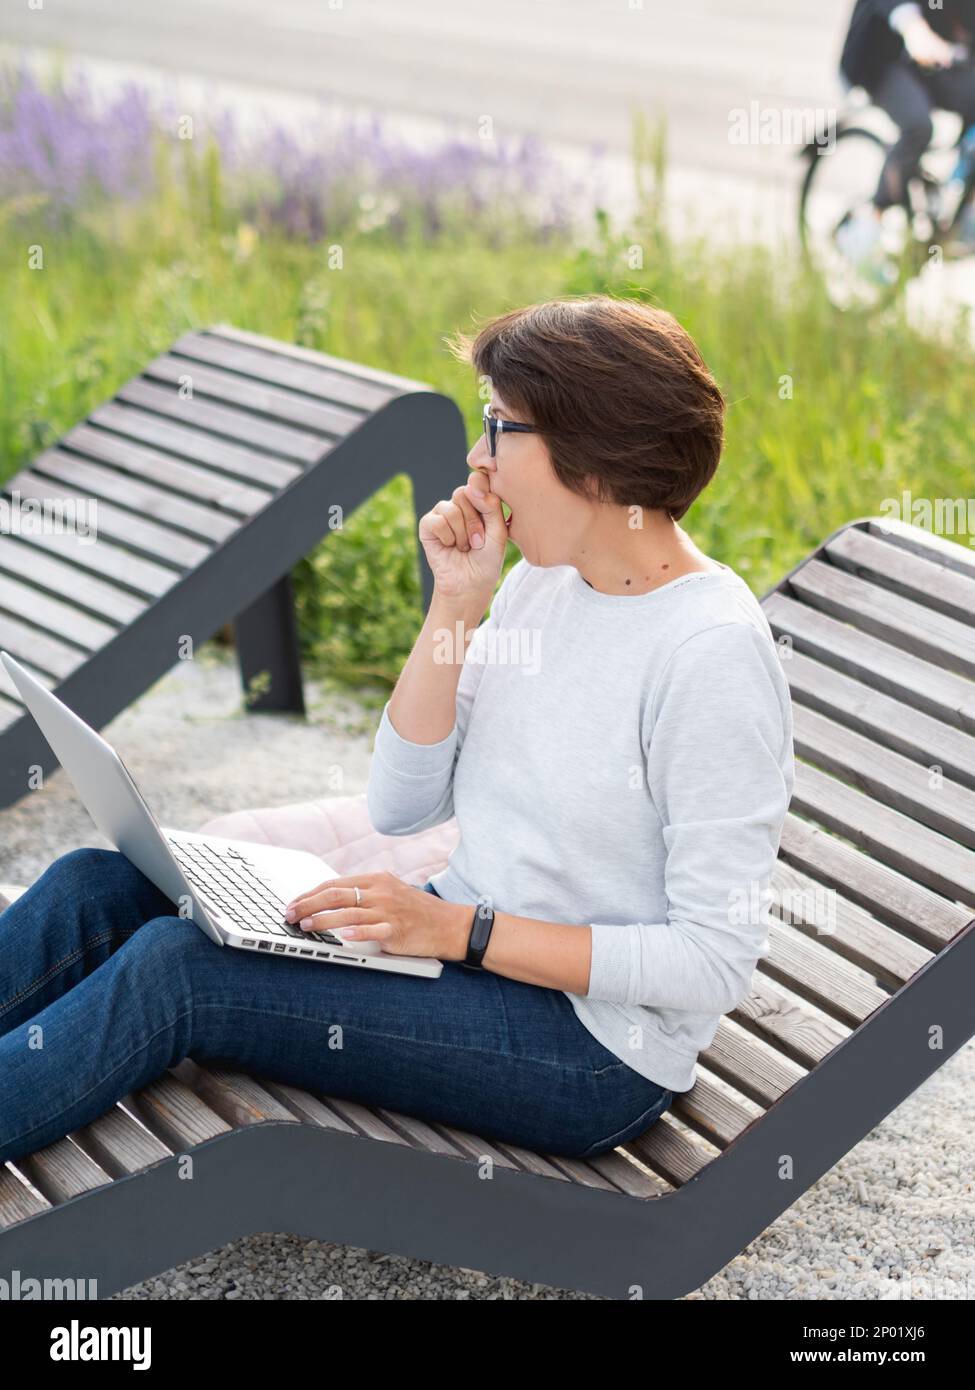 Woman sits with laptop on urban park bench. Freelancer yawns at work. Student learns remotely from outdoors. Modern lifestyle. Stock Photo